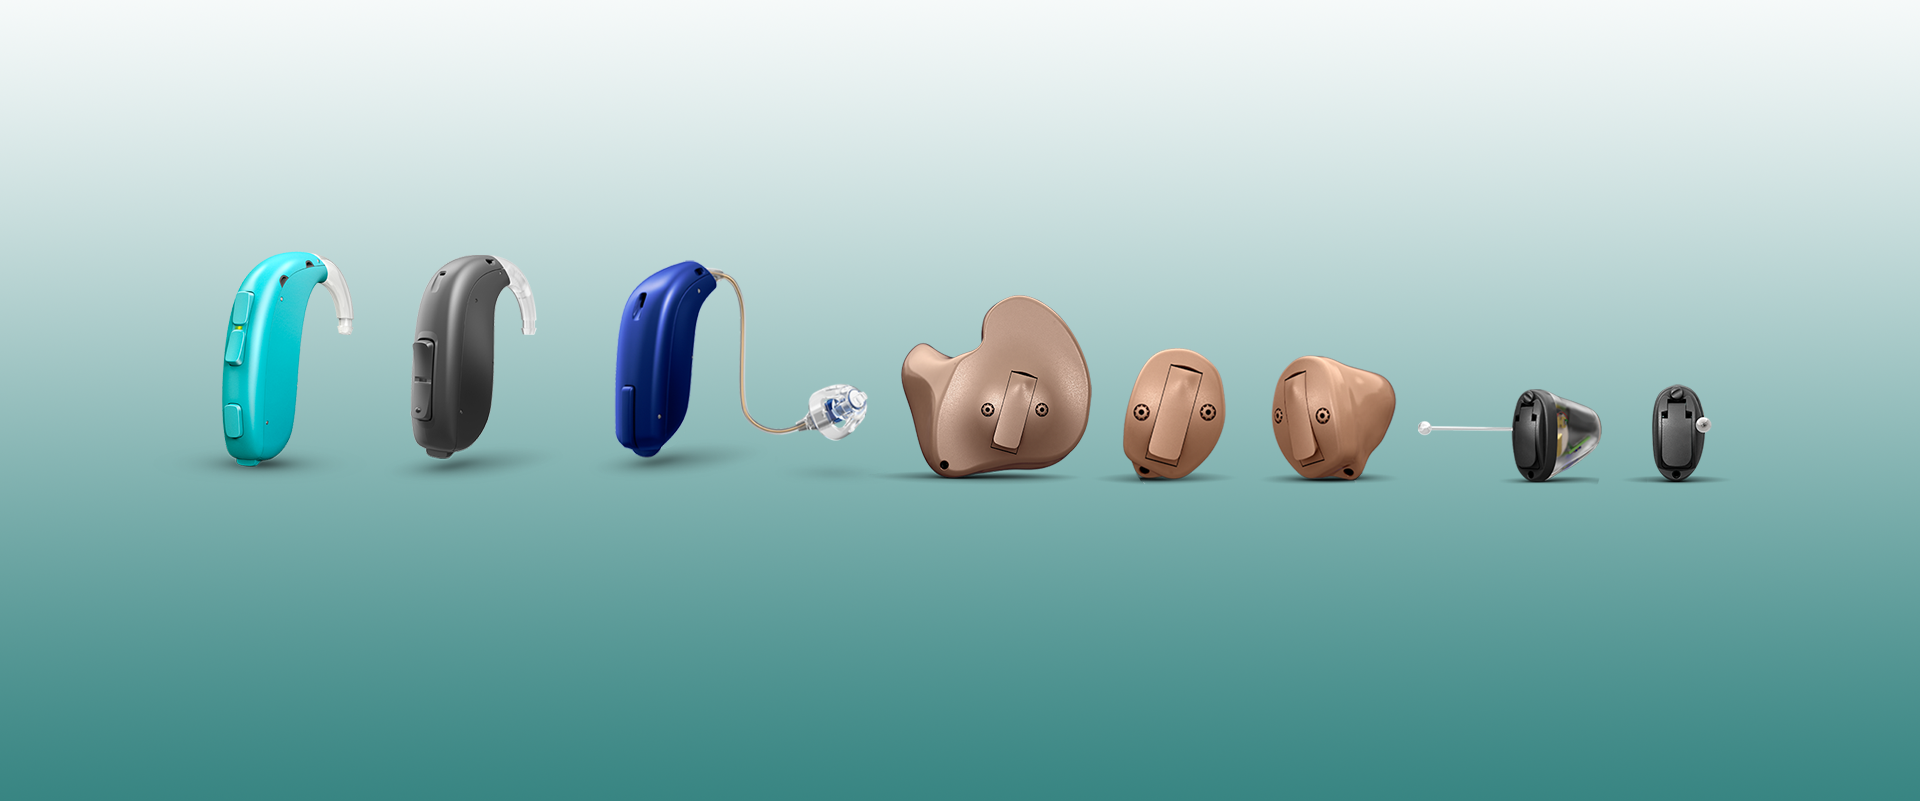 Ear Wax Removal Hearing Aids High Wycombe Samay Hearing Solutions